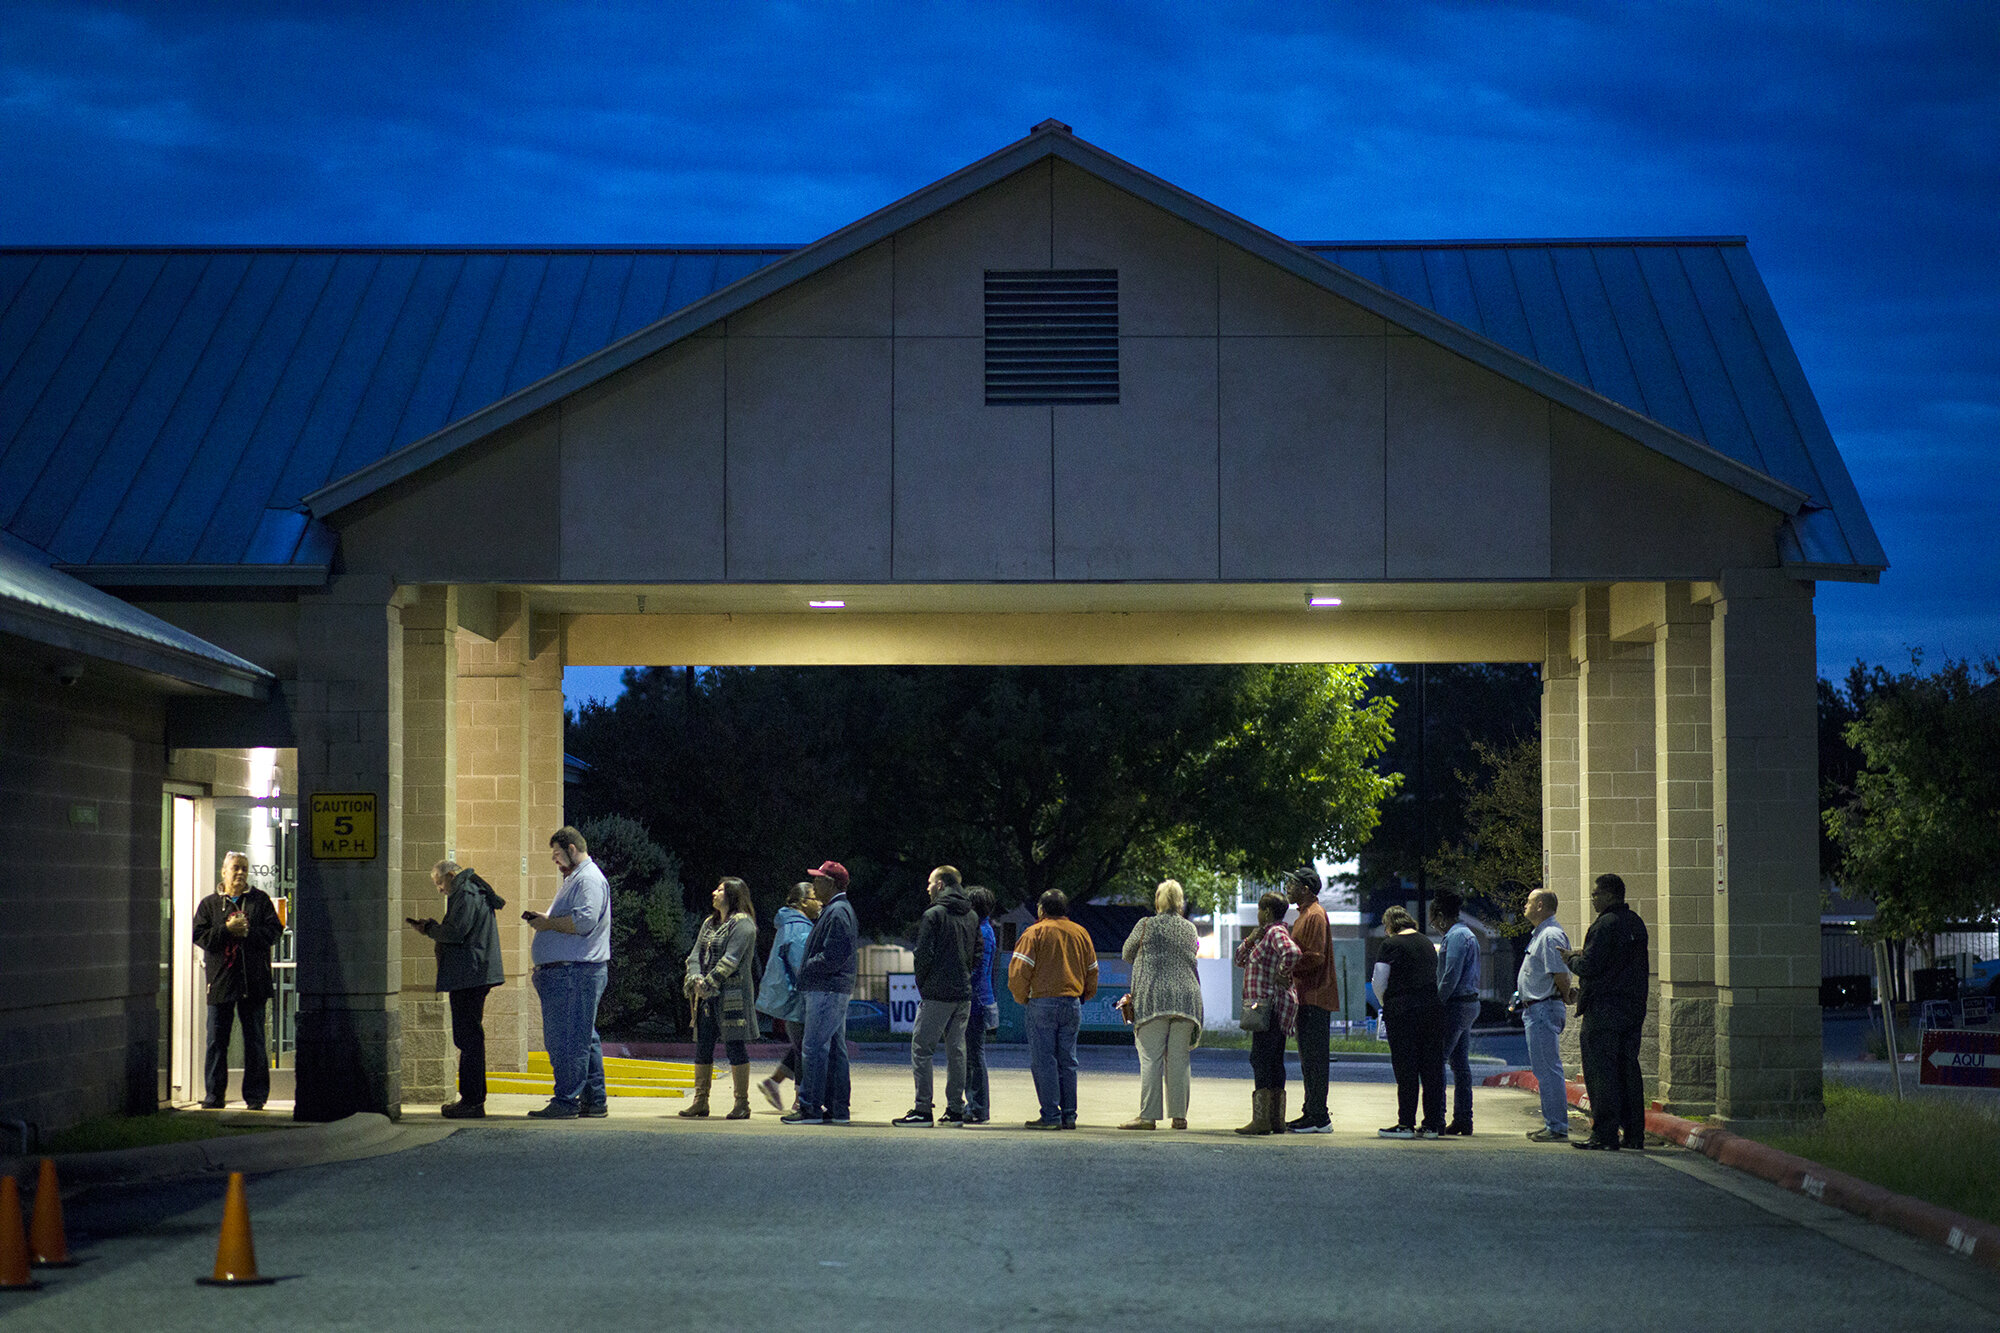  AUSTIN, TX. Voters gather outside of the Travis County Tax Office before sunrise to vote on the first day of early voting for the 2018 midterm election.  